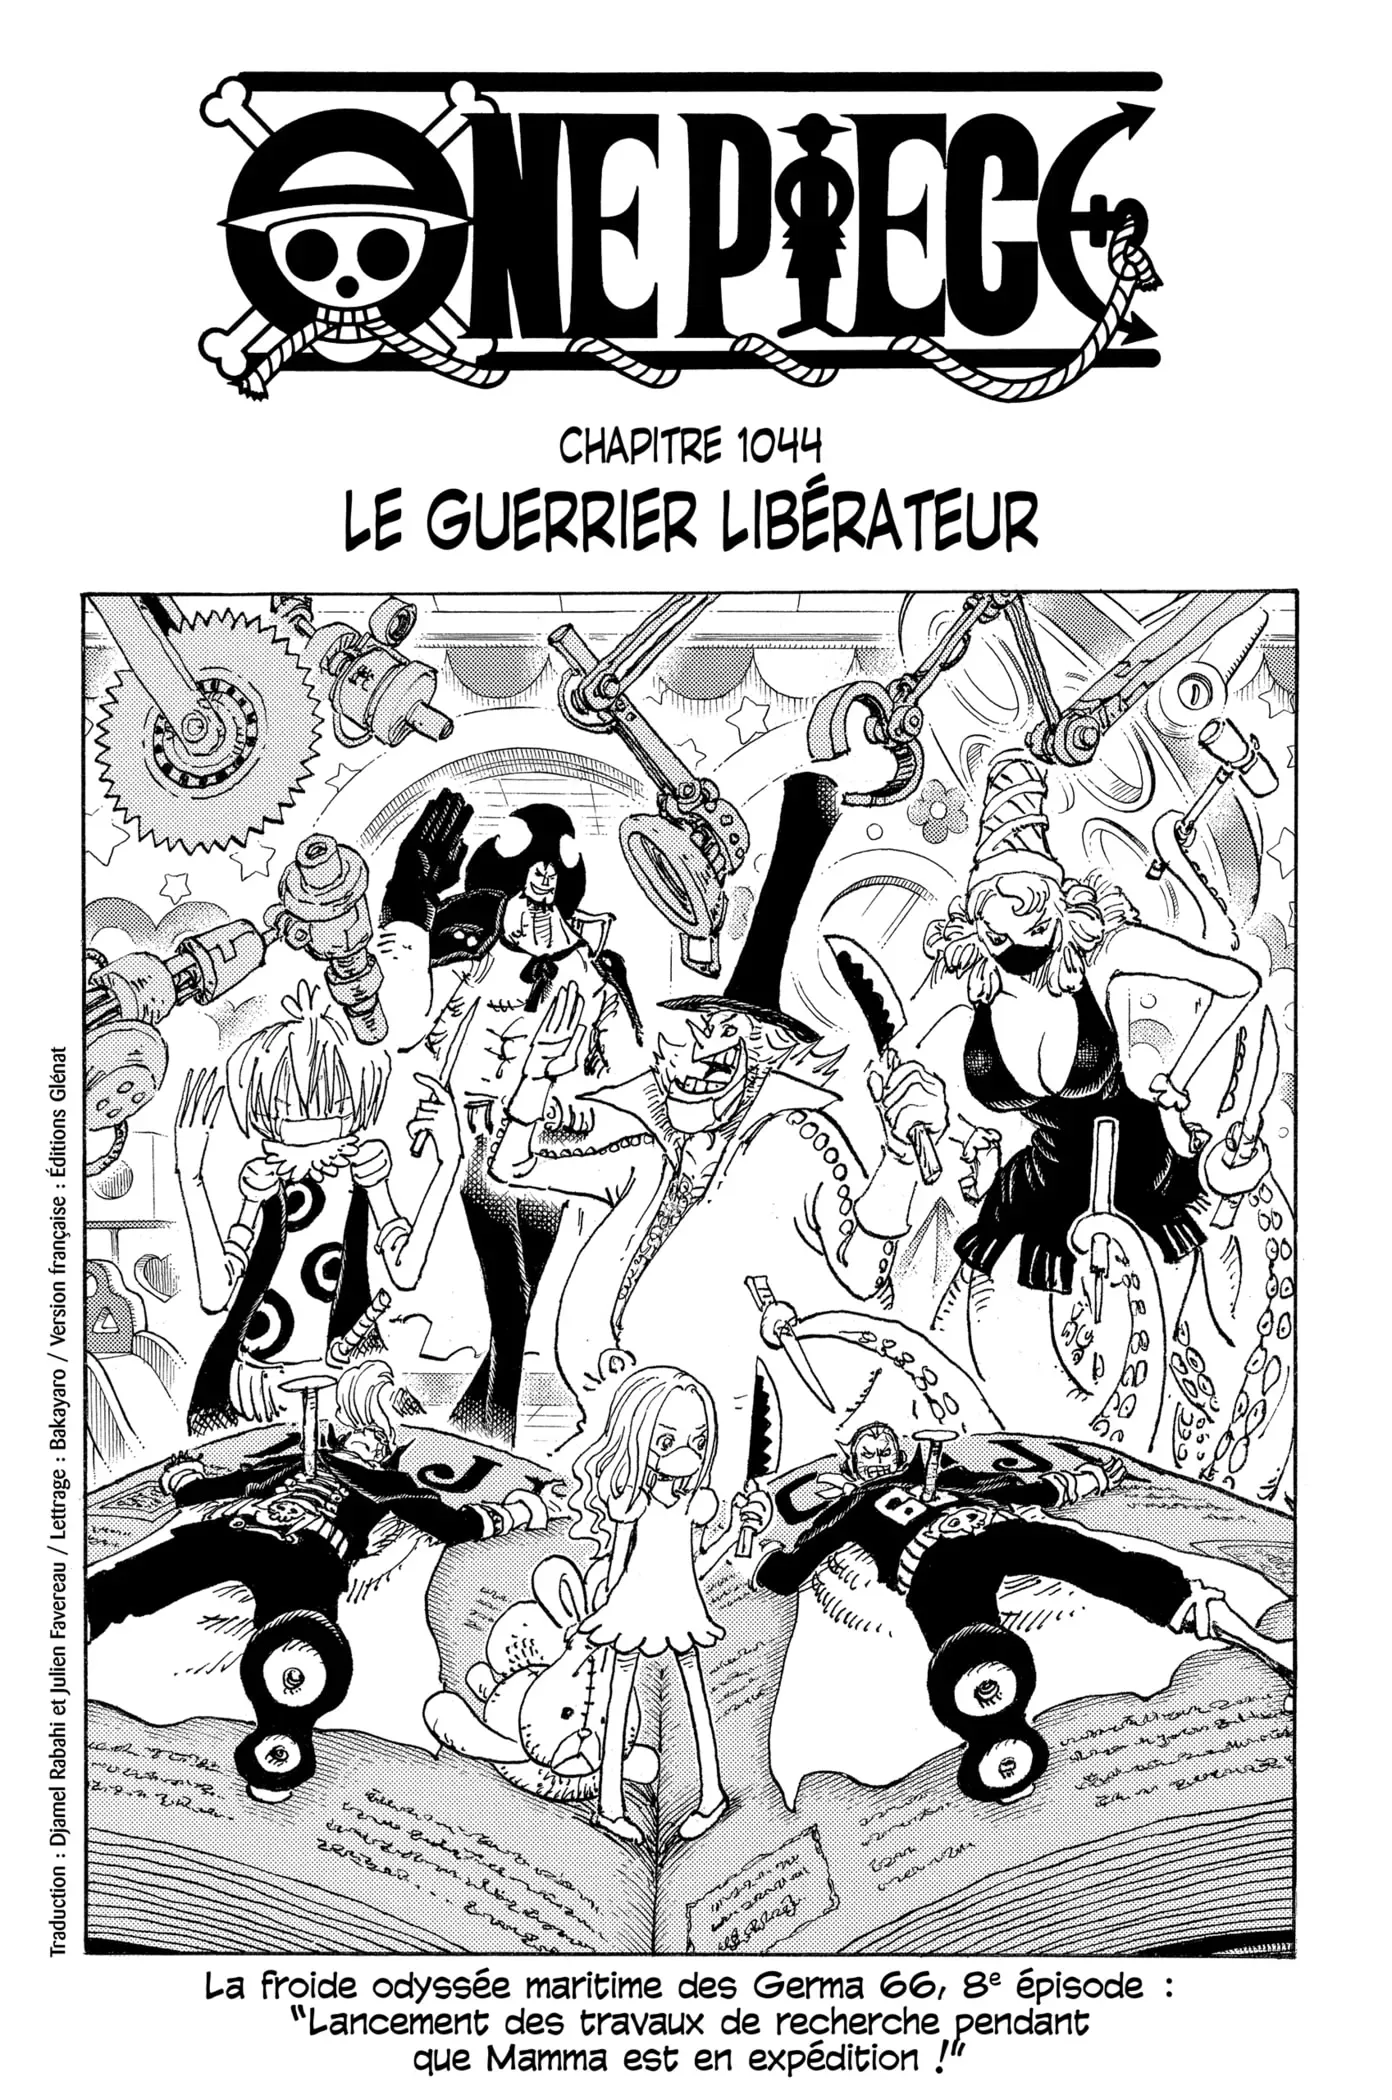 One Piece: Chapter chapitre-1044 - Page 1